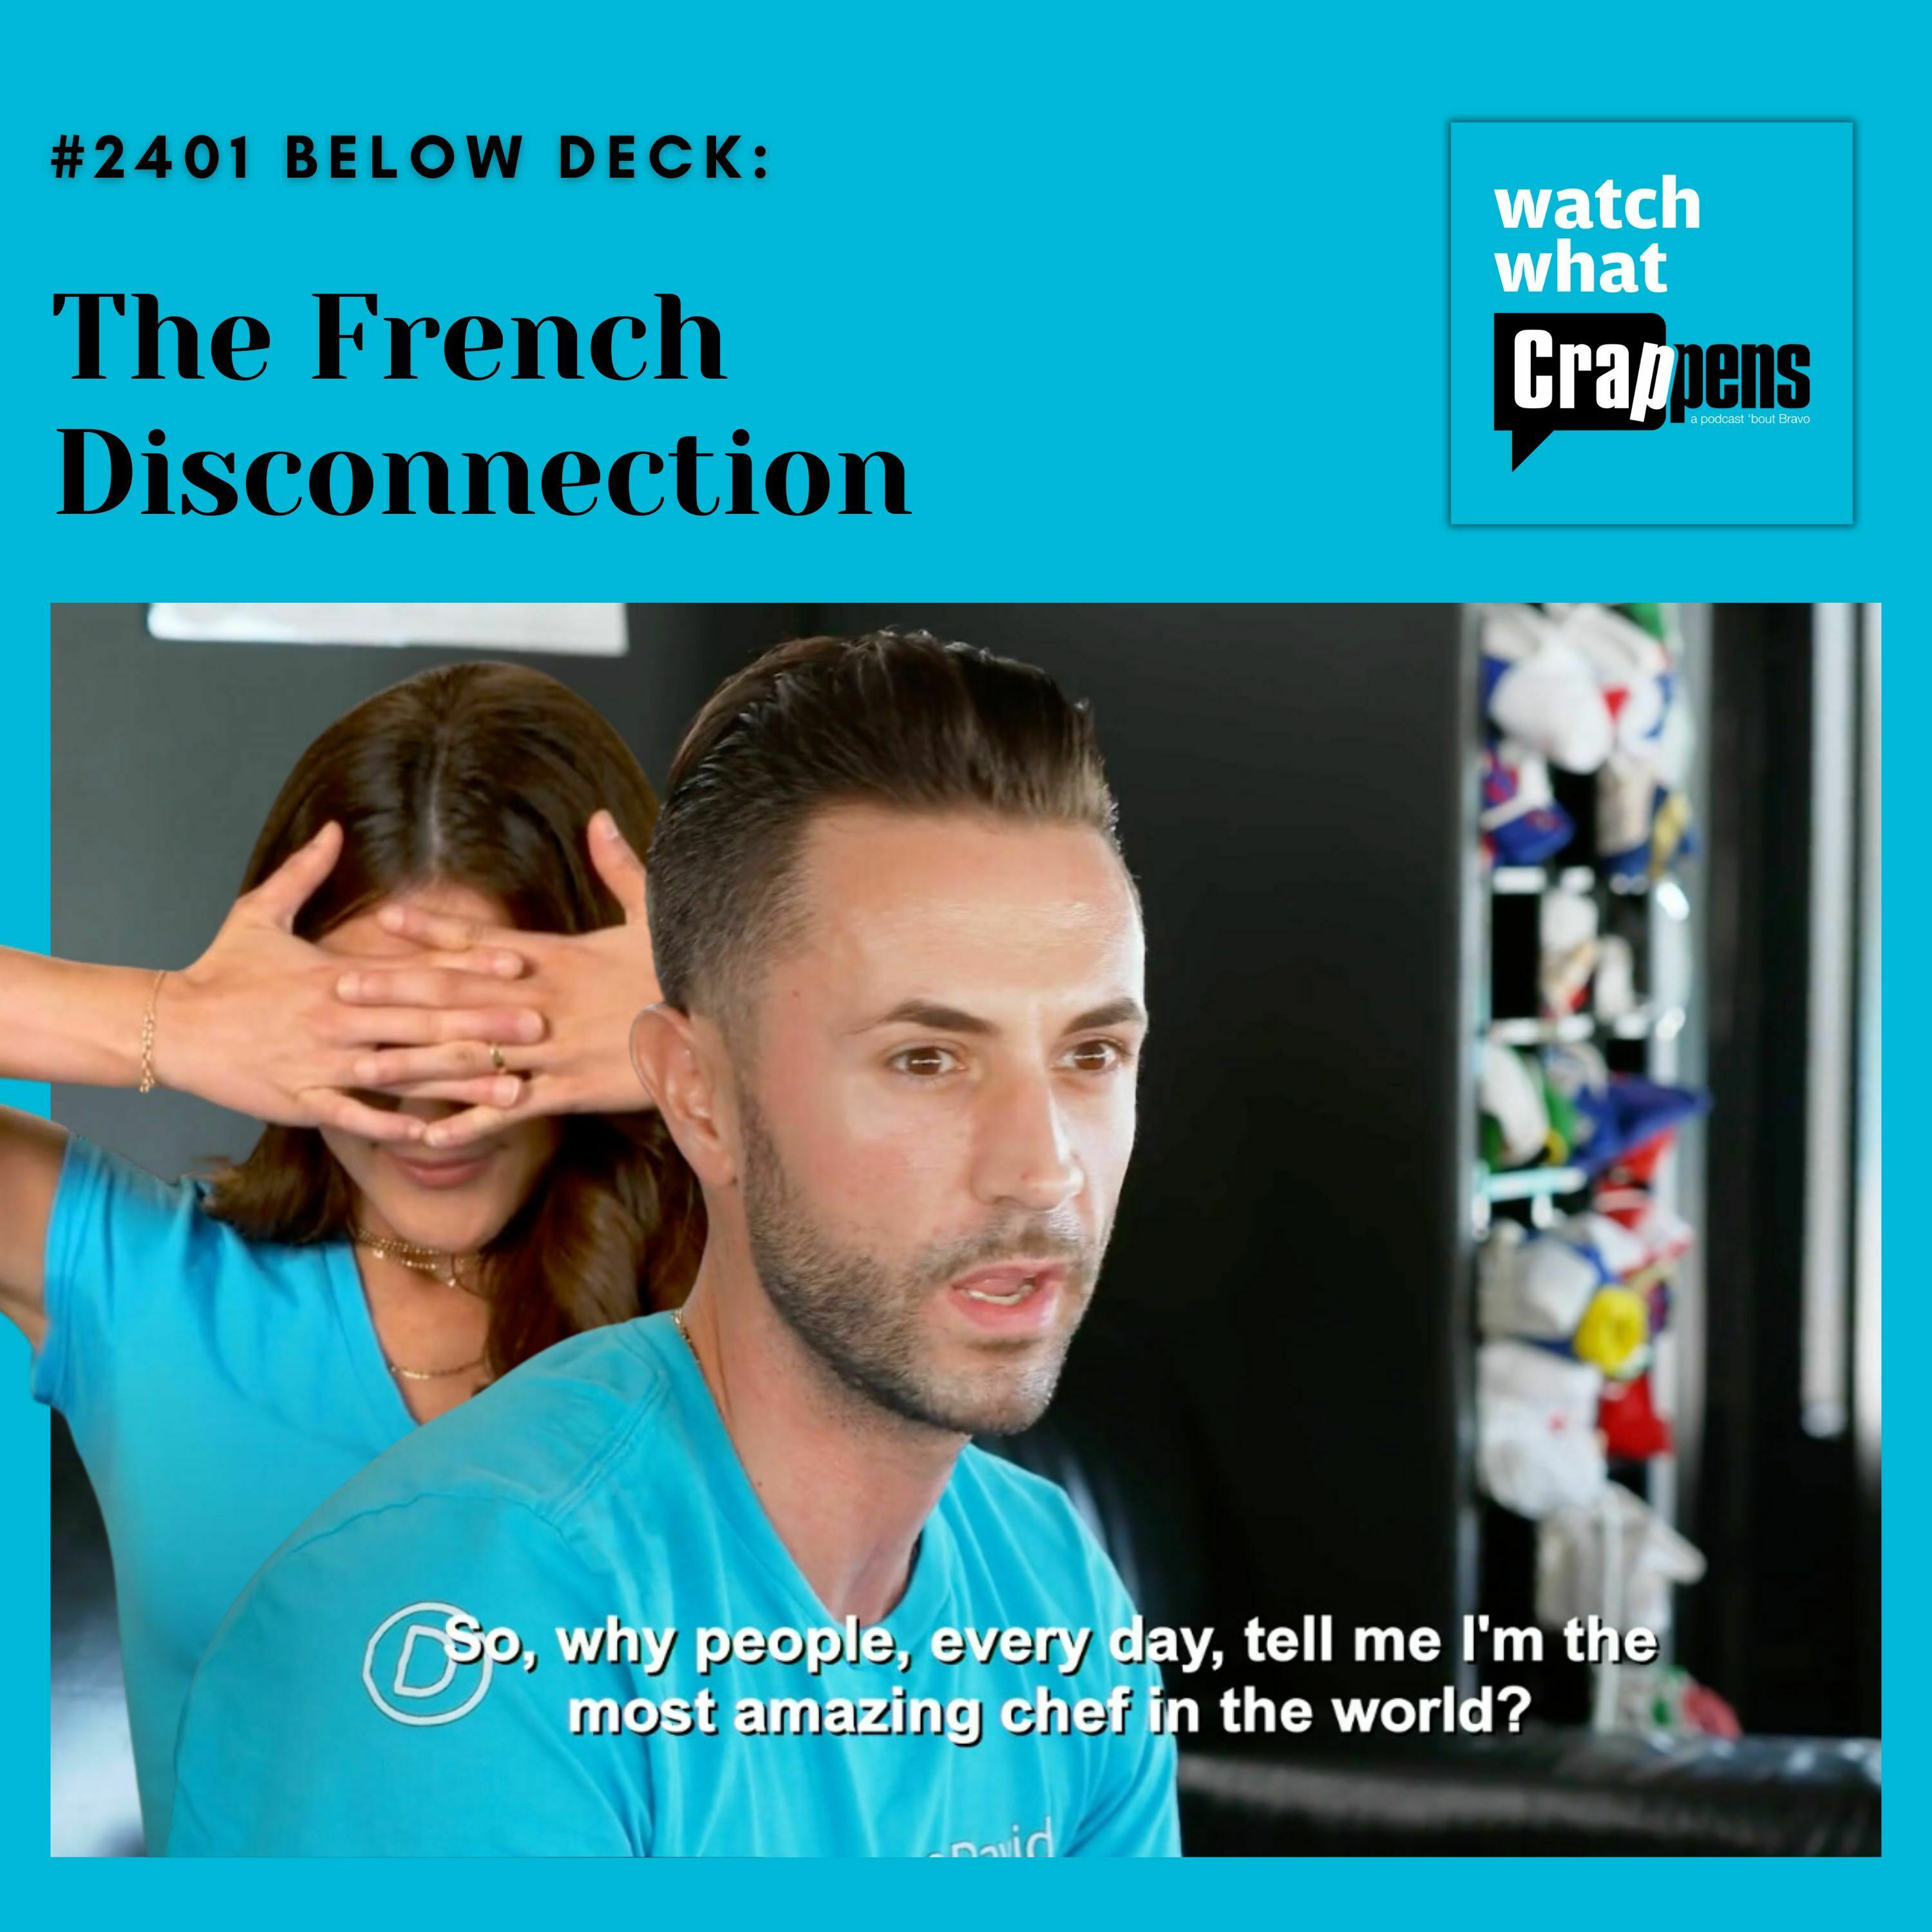 #2401 Below Deck: The French Disconnection